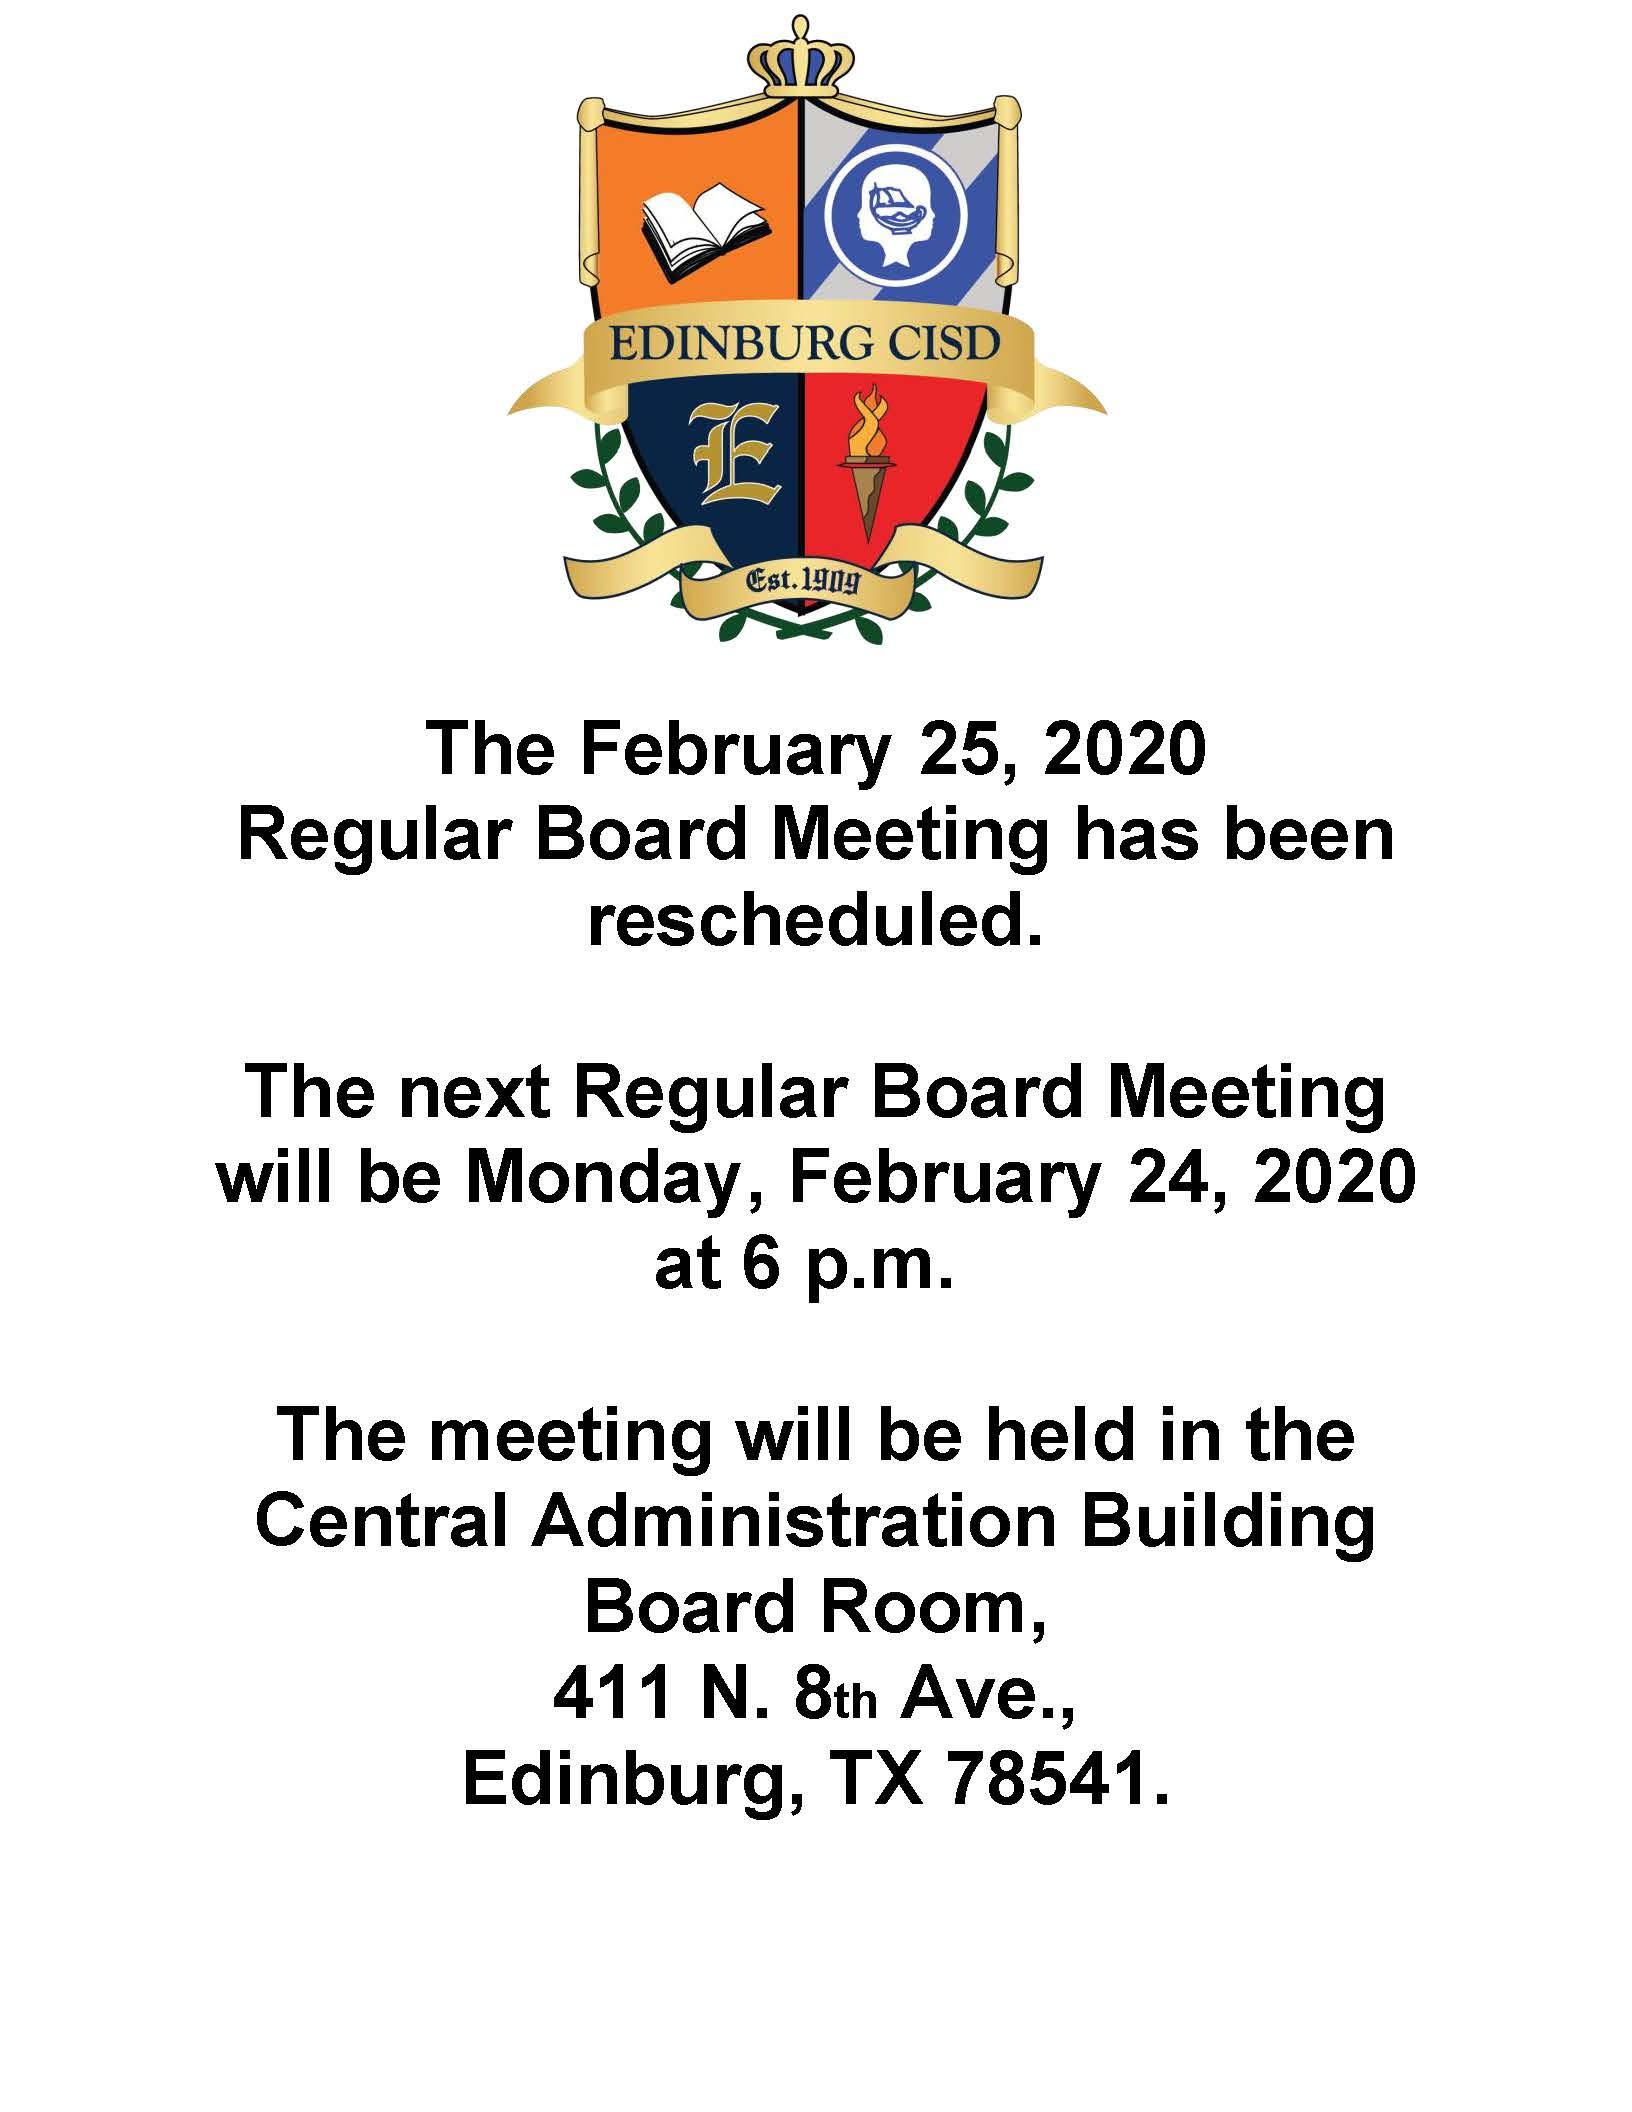 The February 25, 2020  Regular Board Meeting has been rescheduled.  The next Regular Board Meeting will be Monday, February 24, 2020 at 6 p.m.   The meeting will be held in the Central Administration Building Board Room, 411 N. 8th Ave., Edinburg, TX 78541.